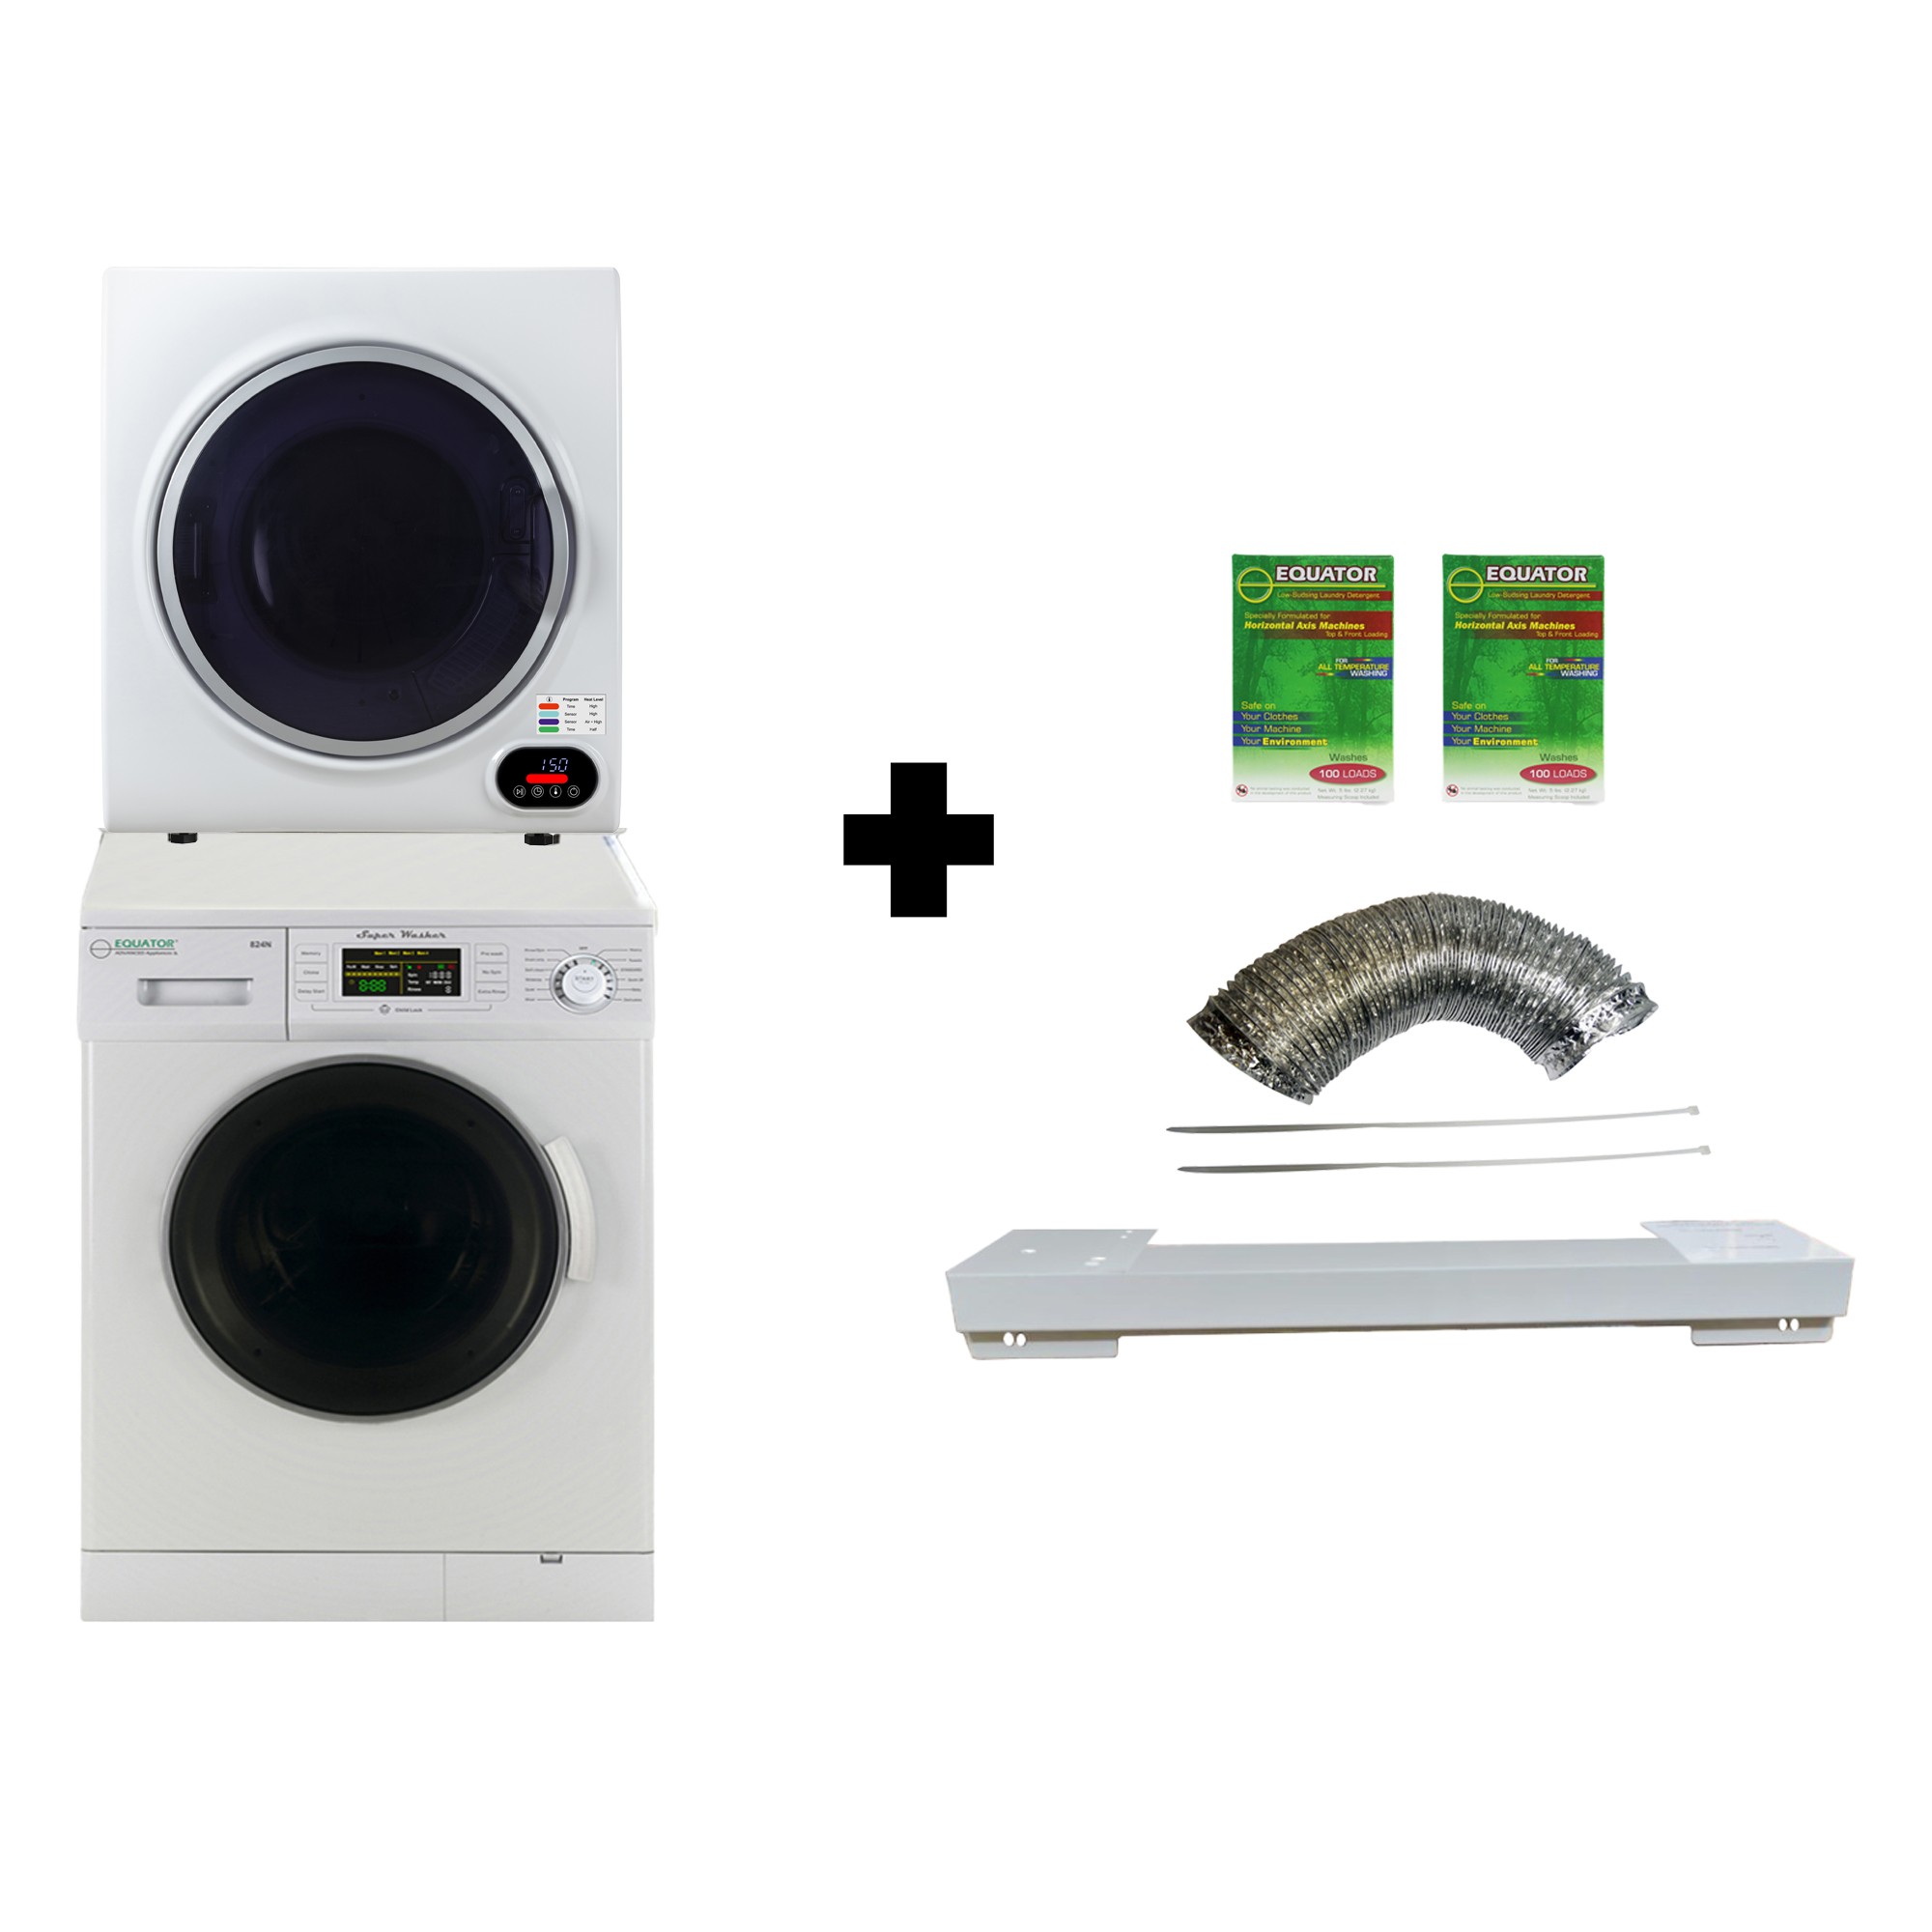 Equator 18lbs White Super Washer 13lbs White Compact Dryer - Stackable Set		(with two boxes of HE Detergent)		